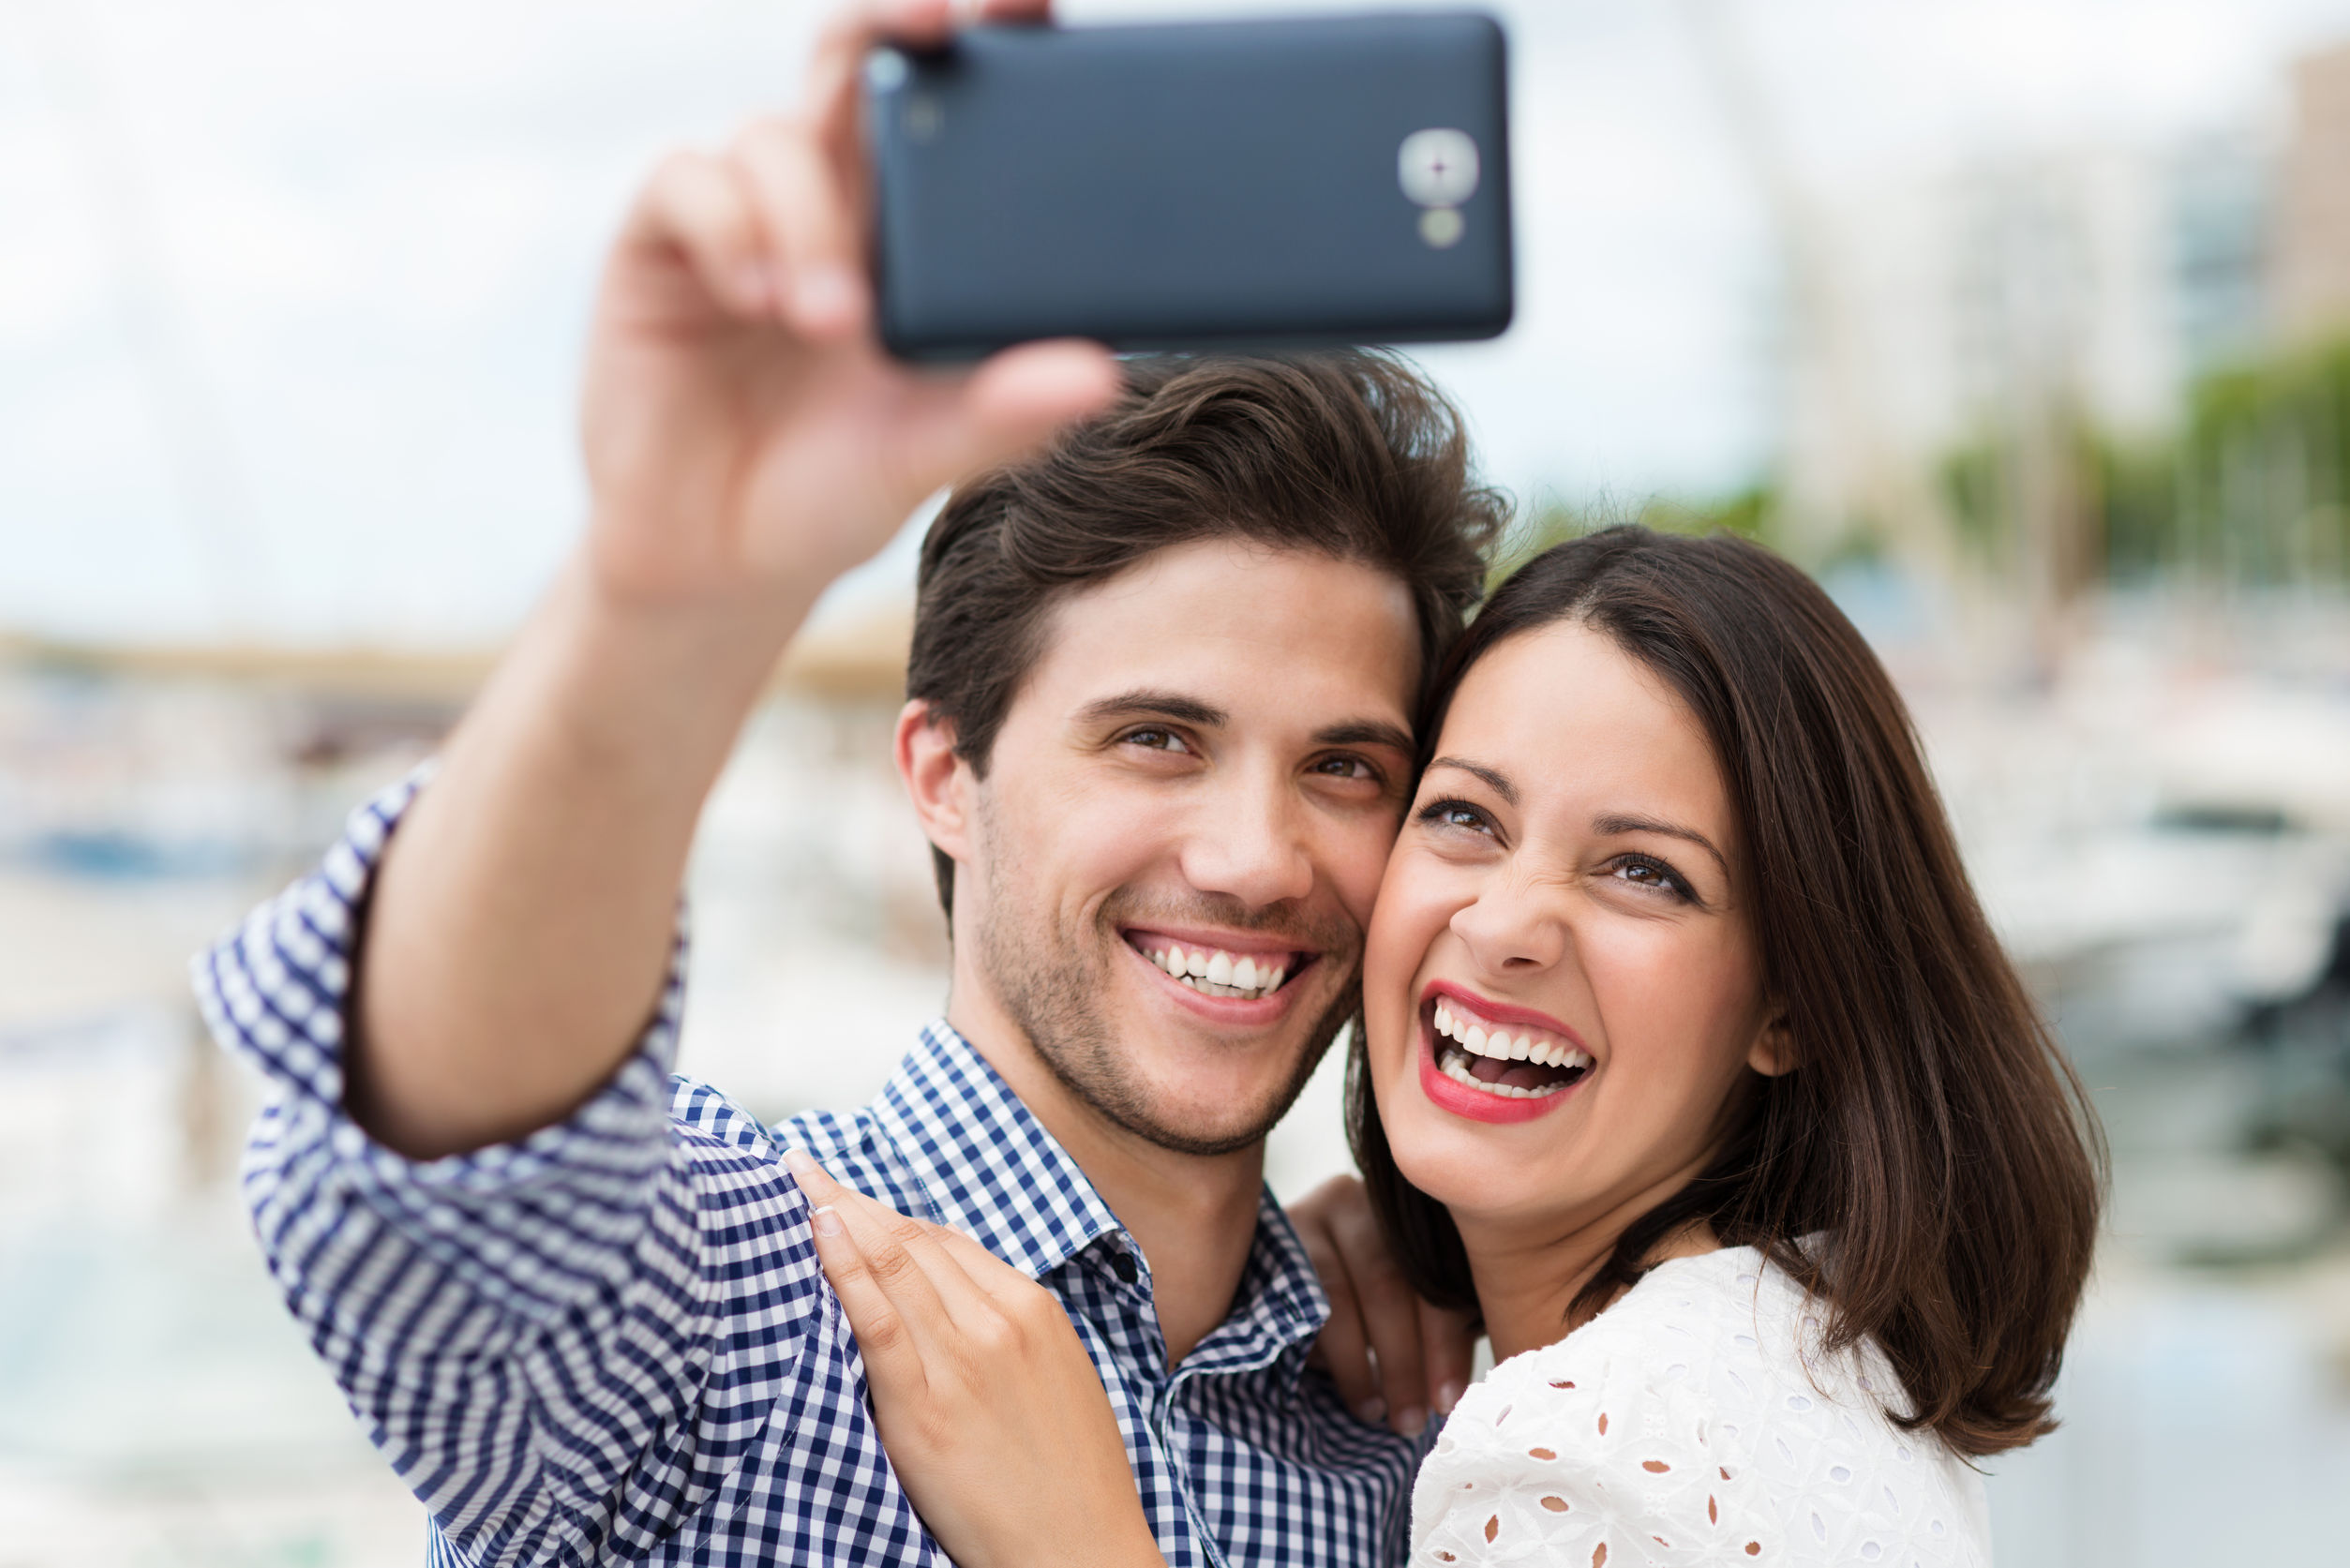 5 Top Tips for Taking Cute Couple Selfies